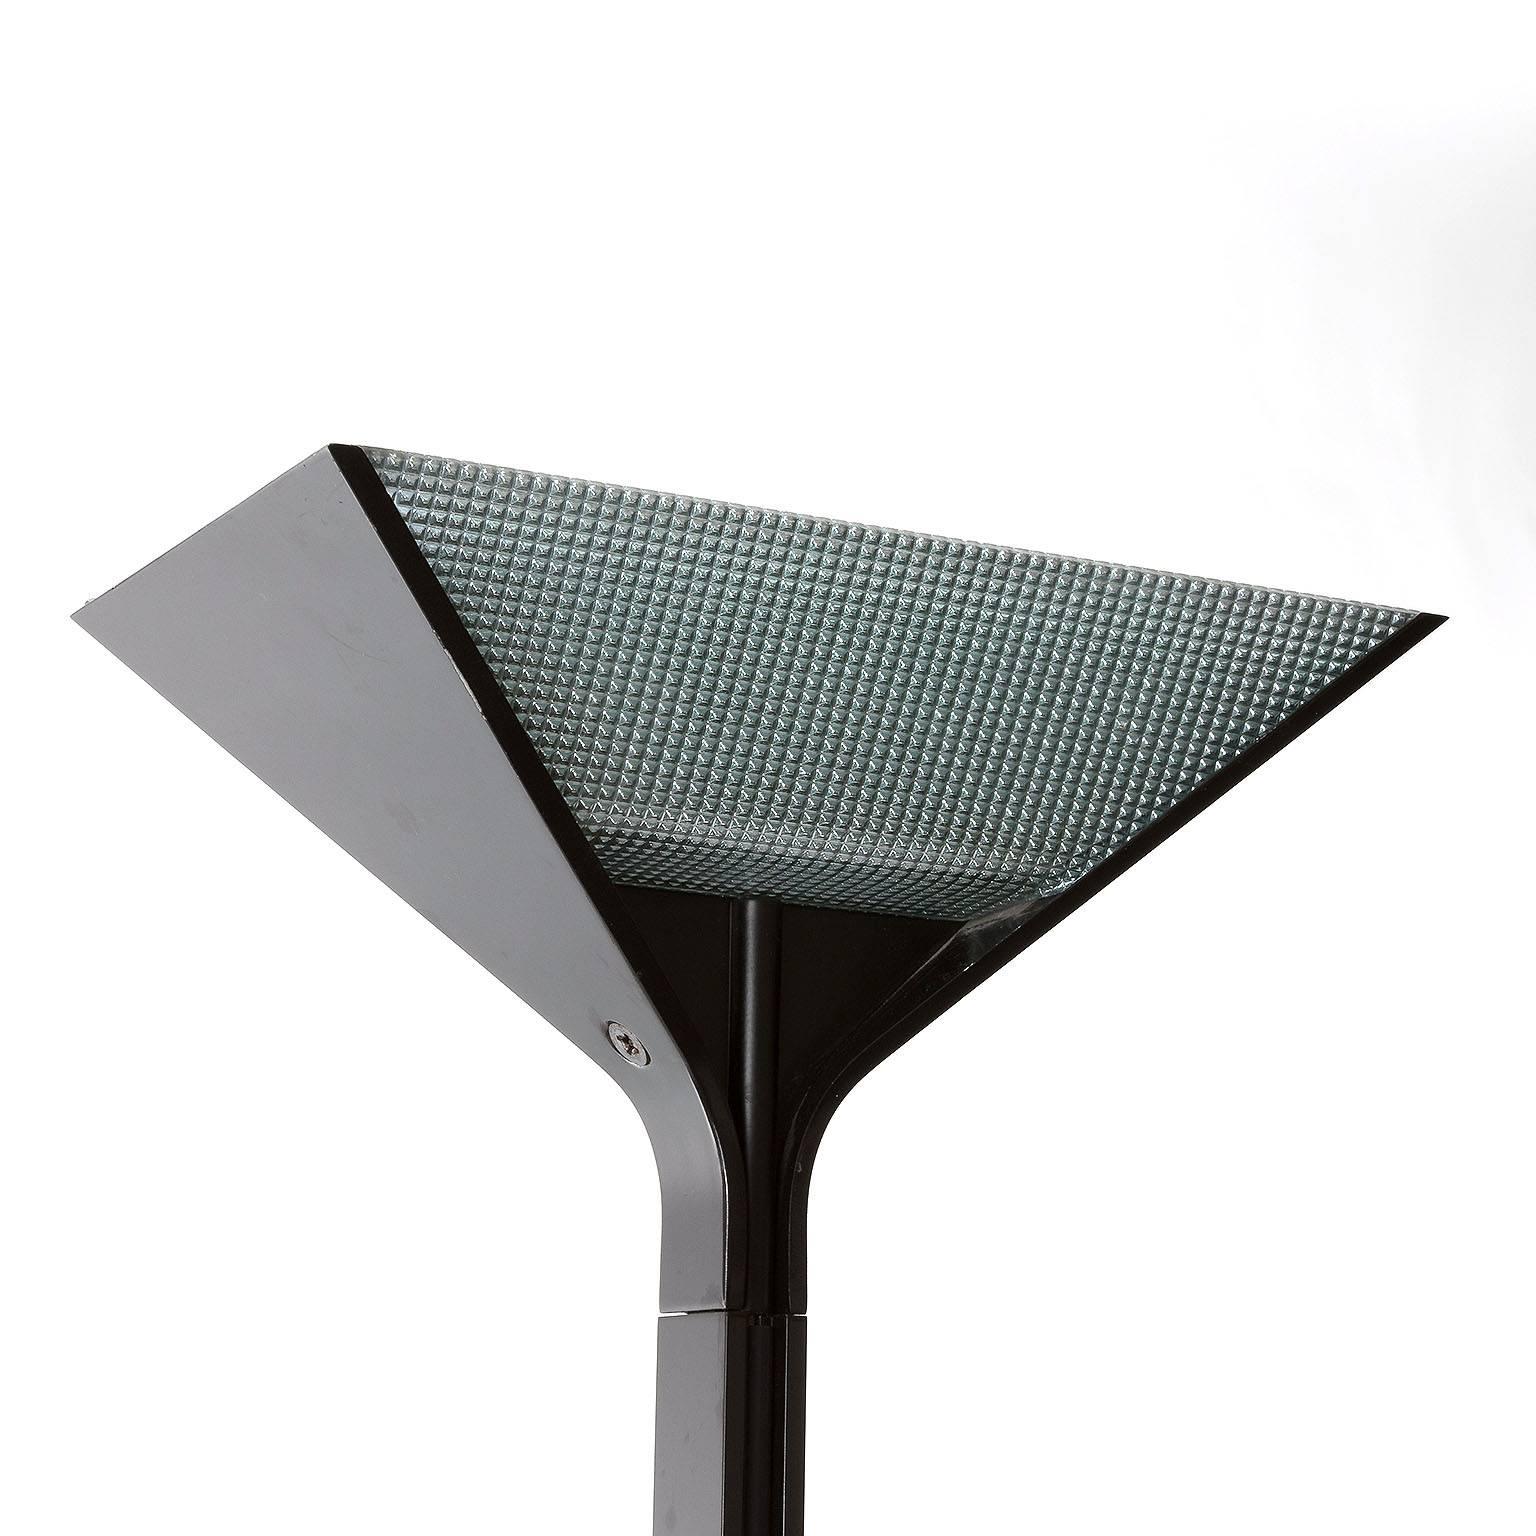 Italian floor uplighter designed by Tobia Scarpa for Flos in 1977, manufactured between 1983-1984. Made of die-cast aluminium, plastic and glass. Stamped on base ´Flos , Papillona, Made in Italy´. 
Tobia Scarpa is the son of world renowned